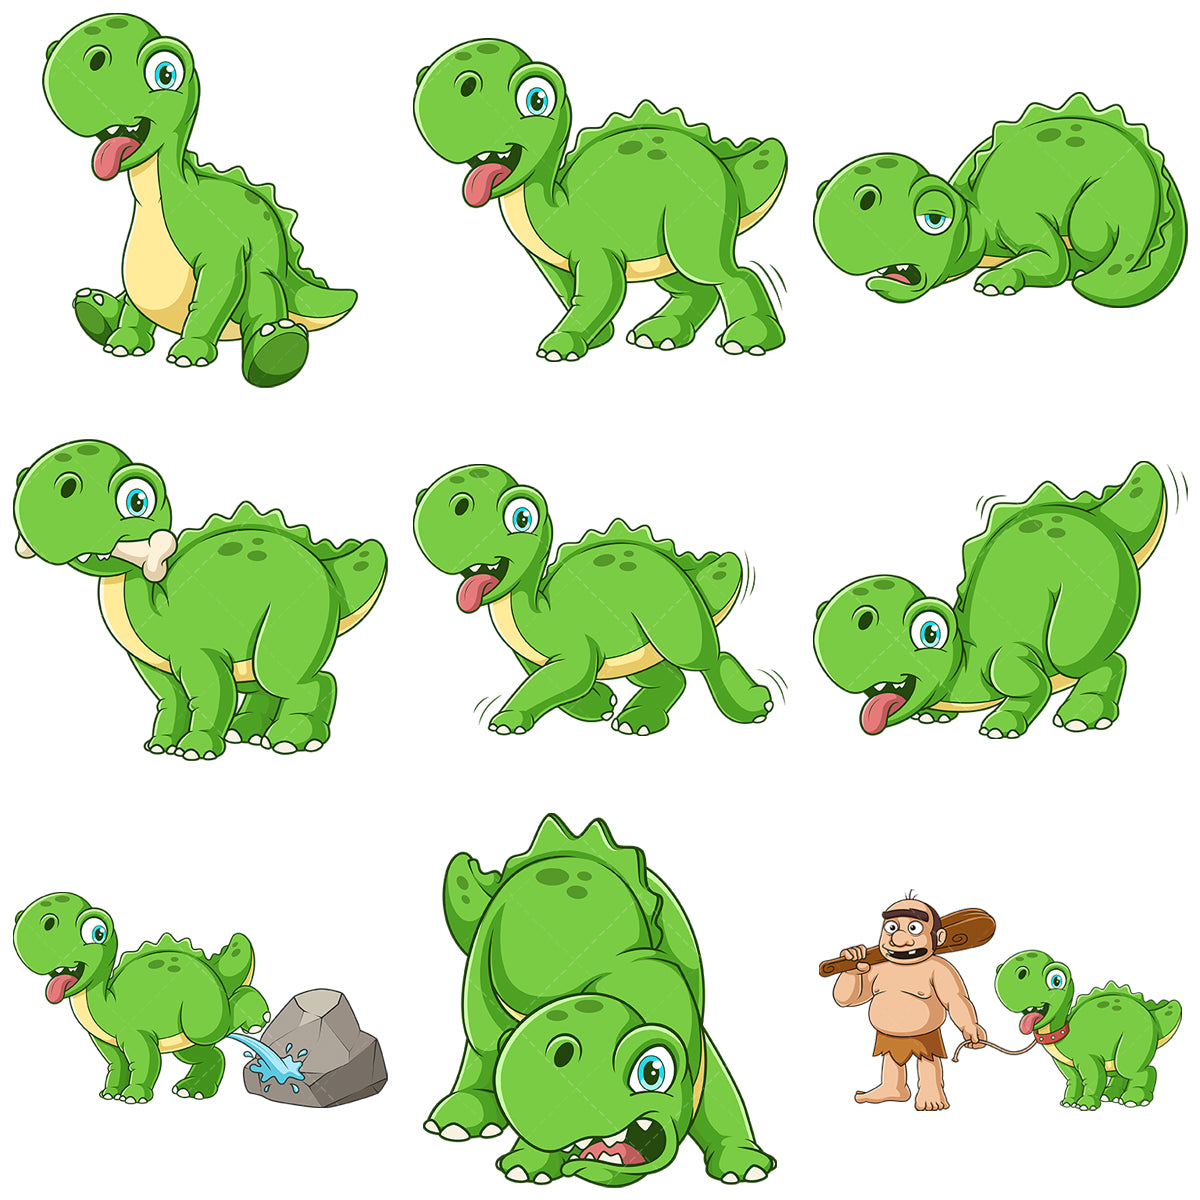 A bundle of 9 royalty-free stock vector illustrations of a cute dinosaur dog.